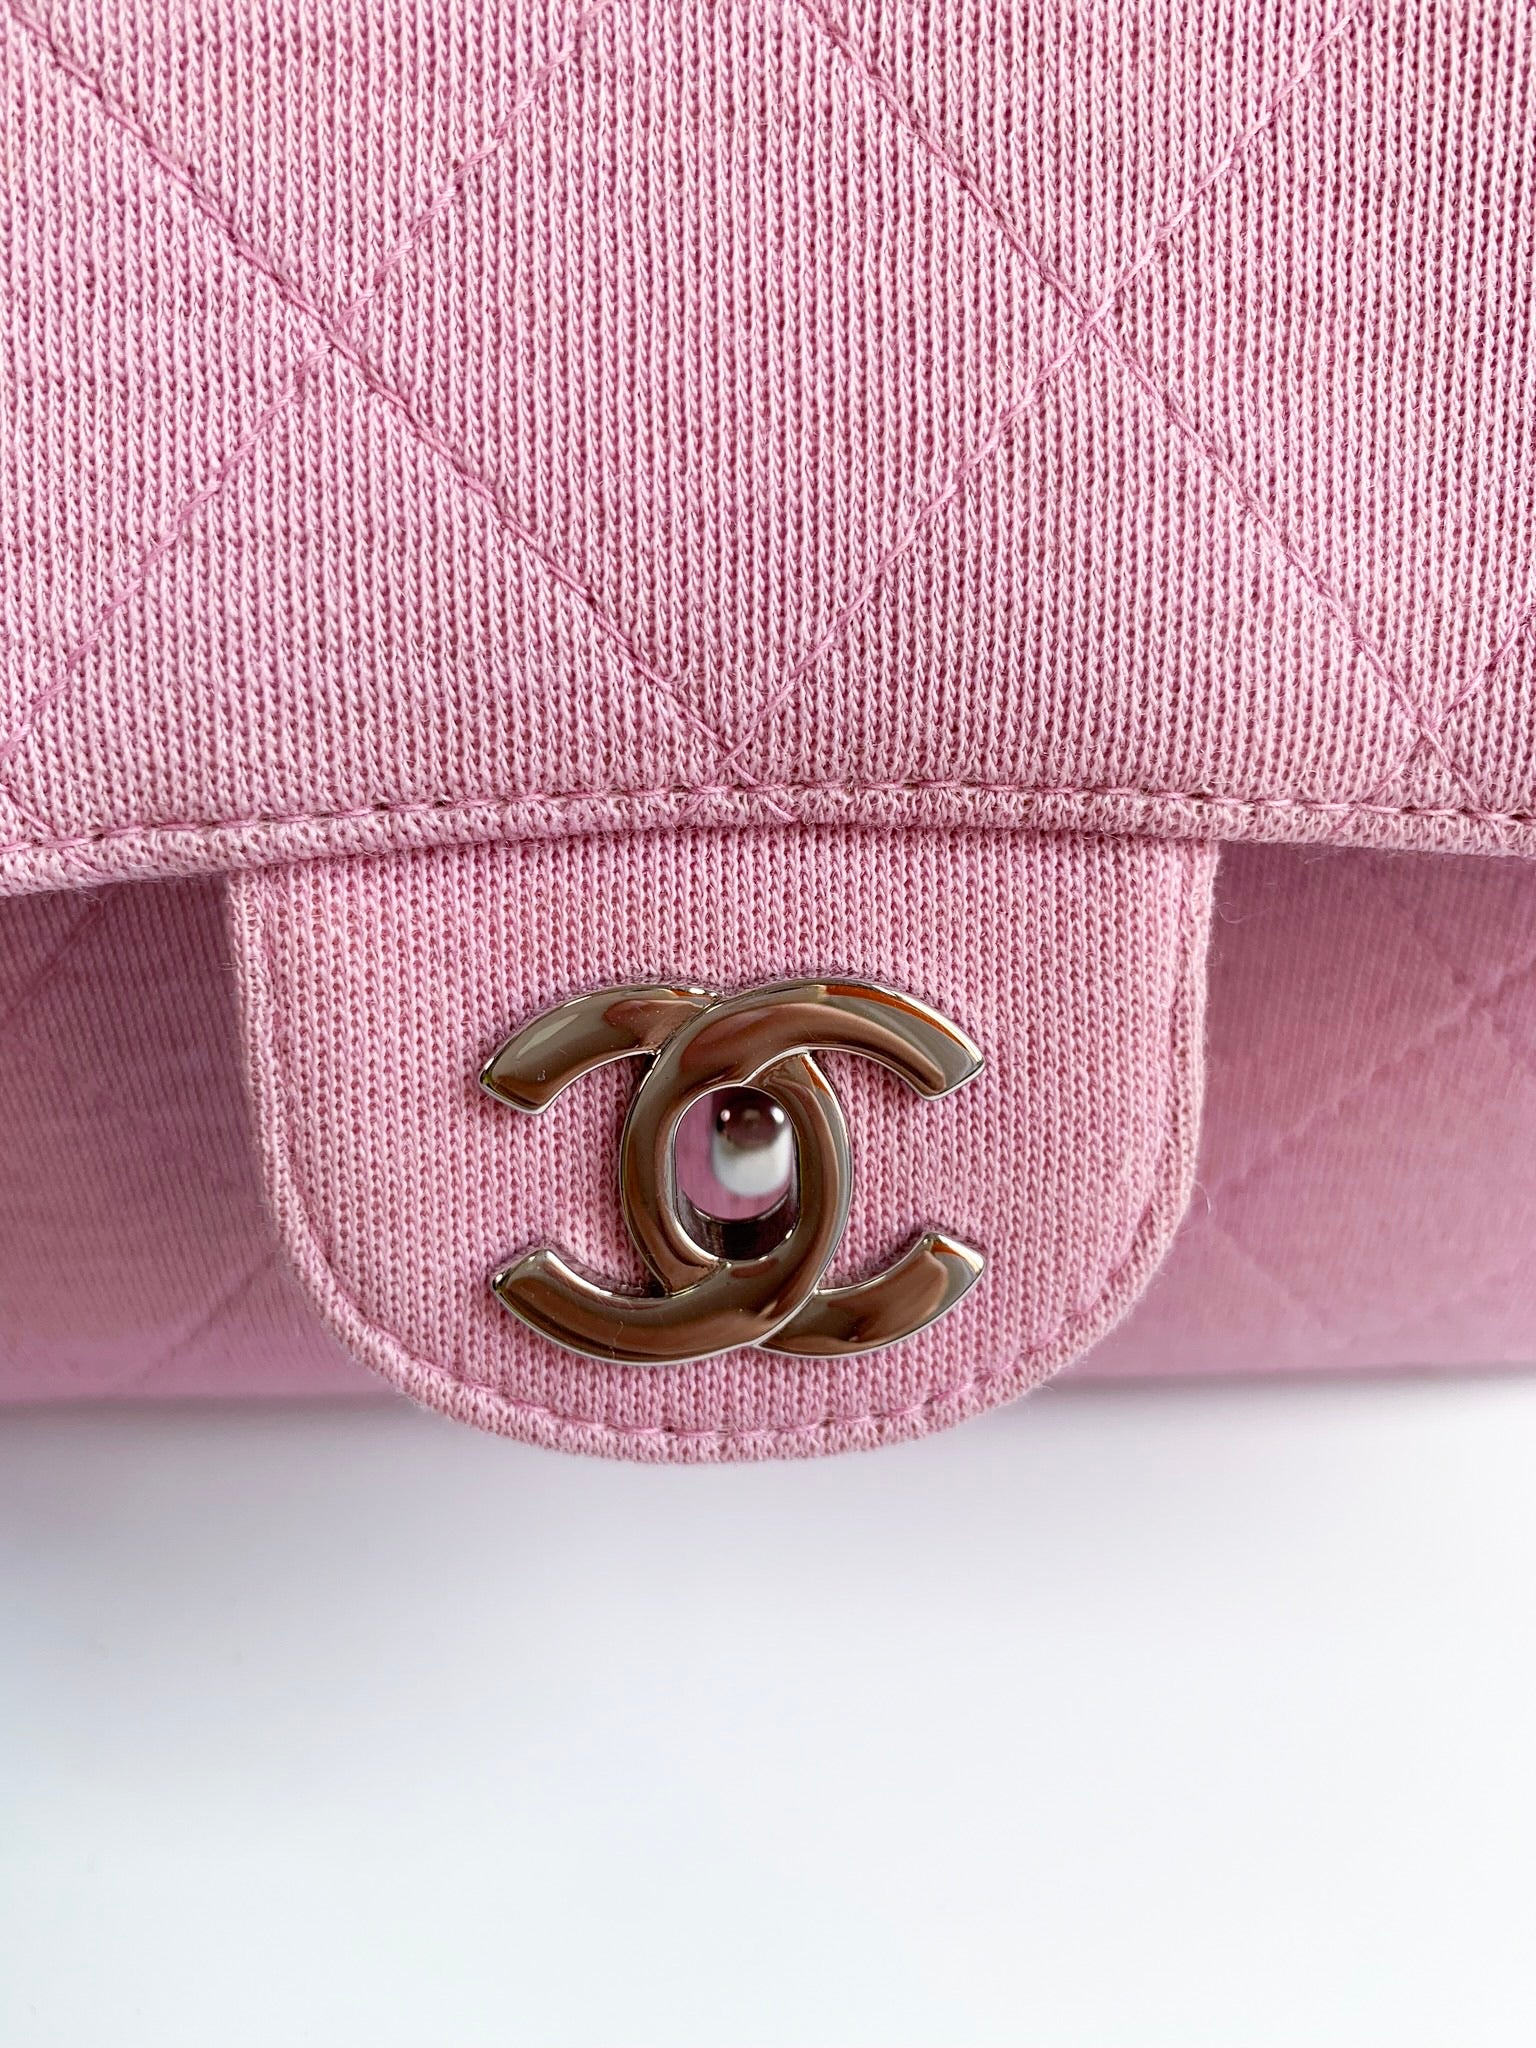 Chanel Vintage Medium Classic Single Flap Bag Quilted Jersey Pink SHW –  Coco Approved Studio